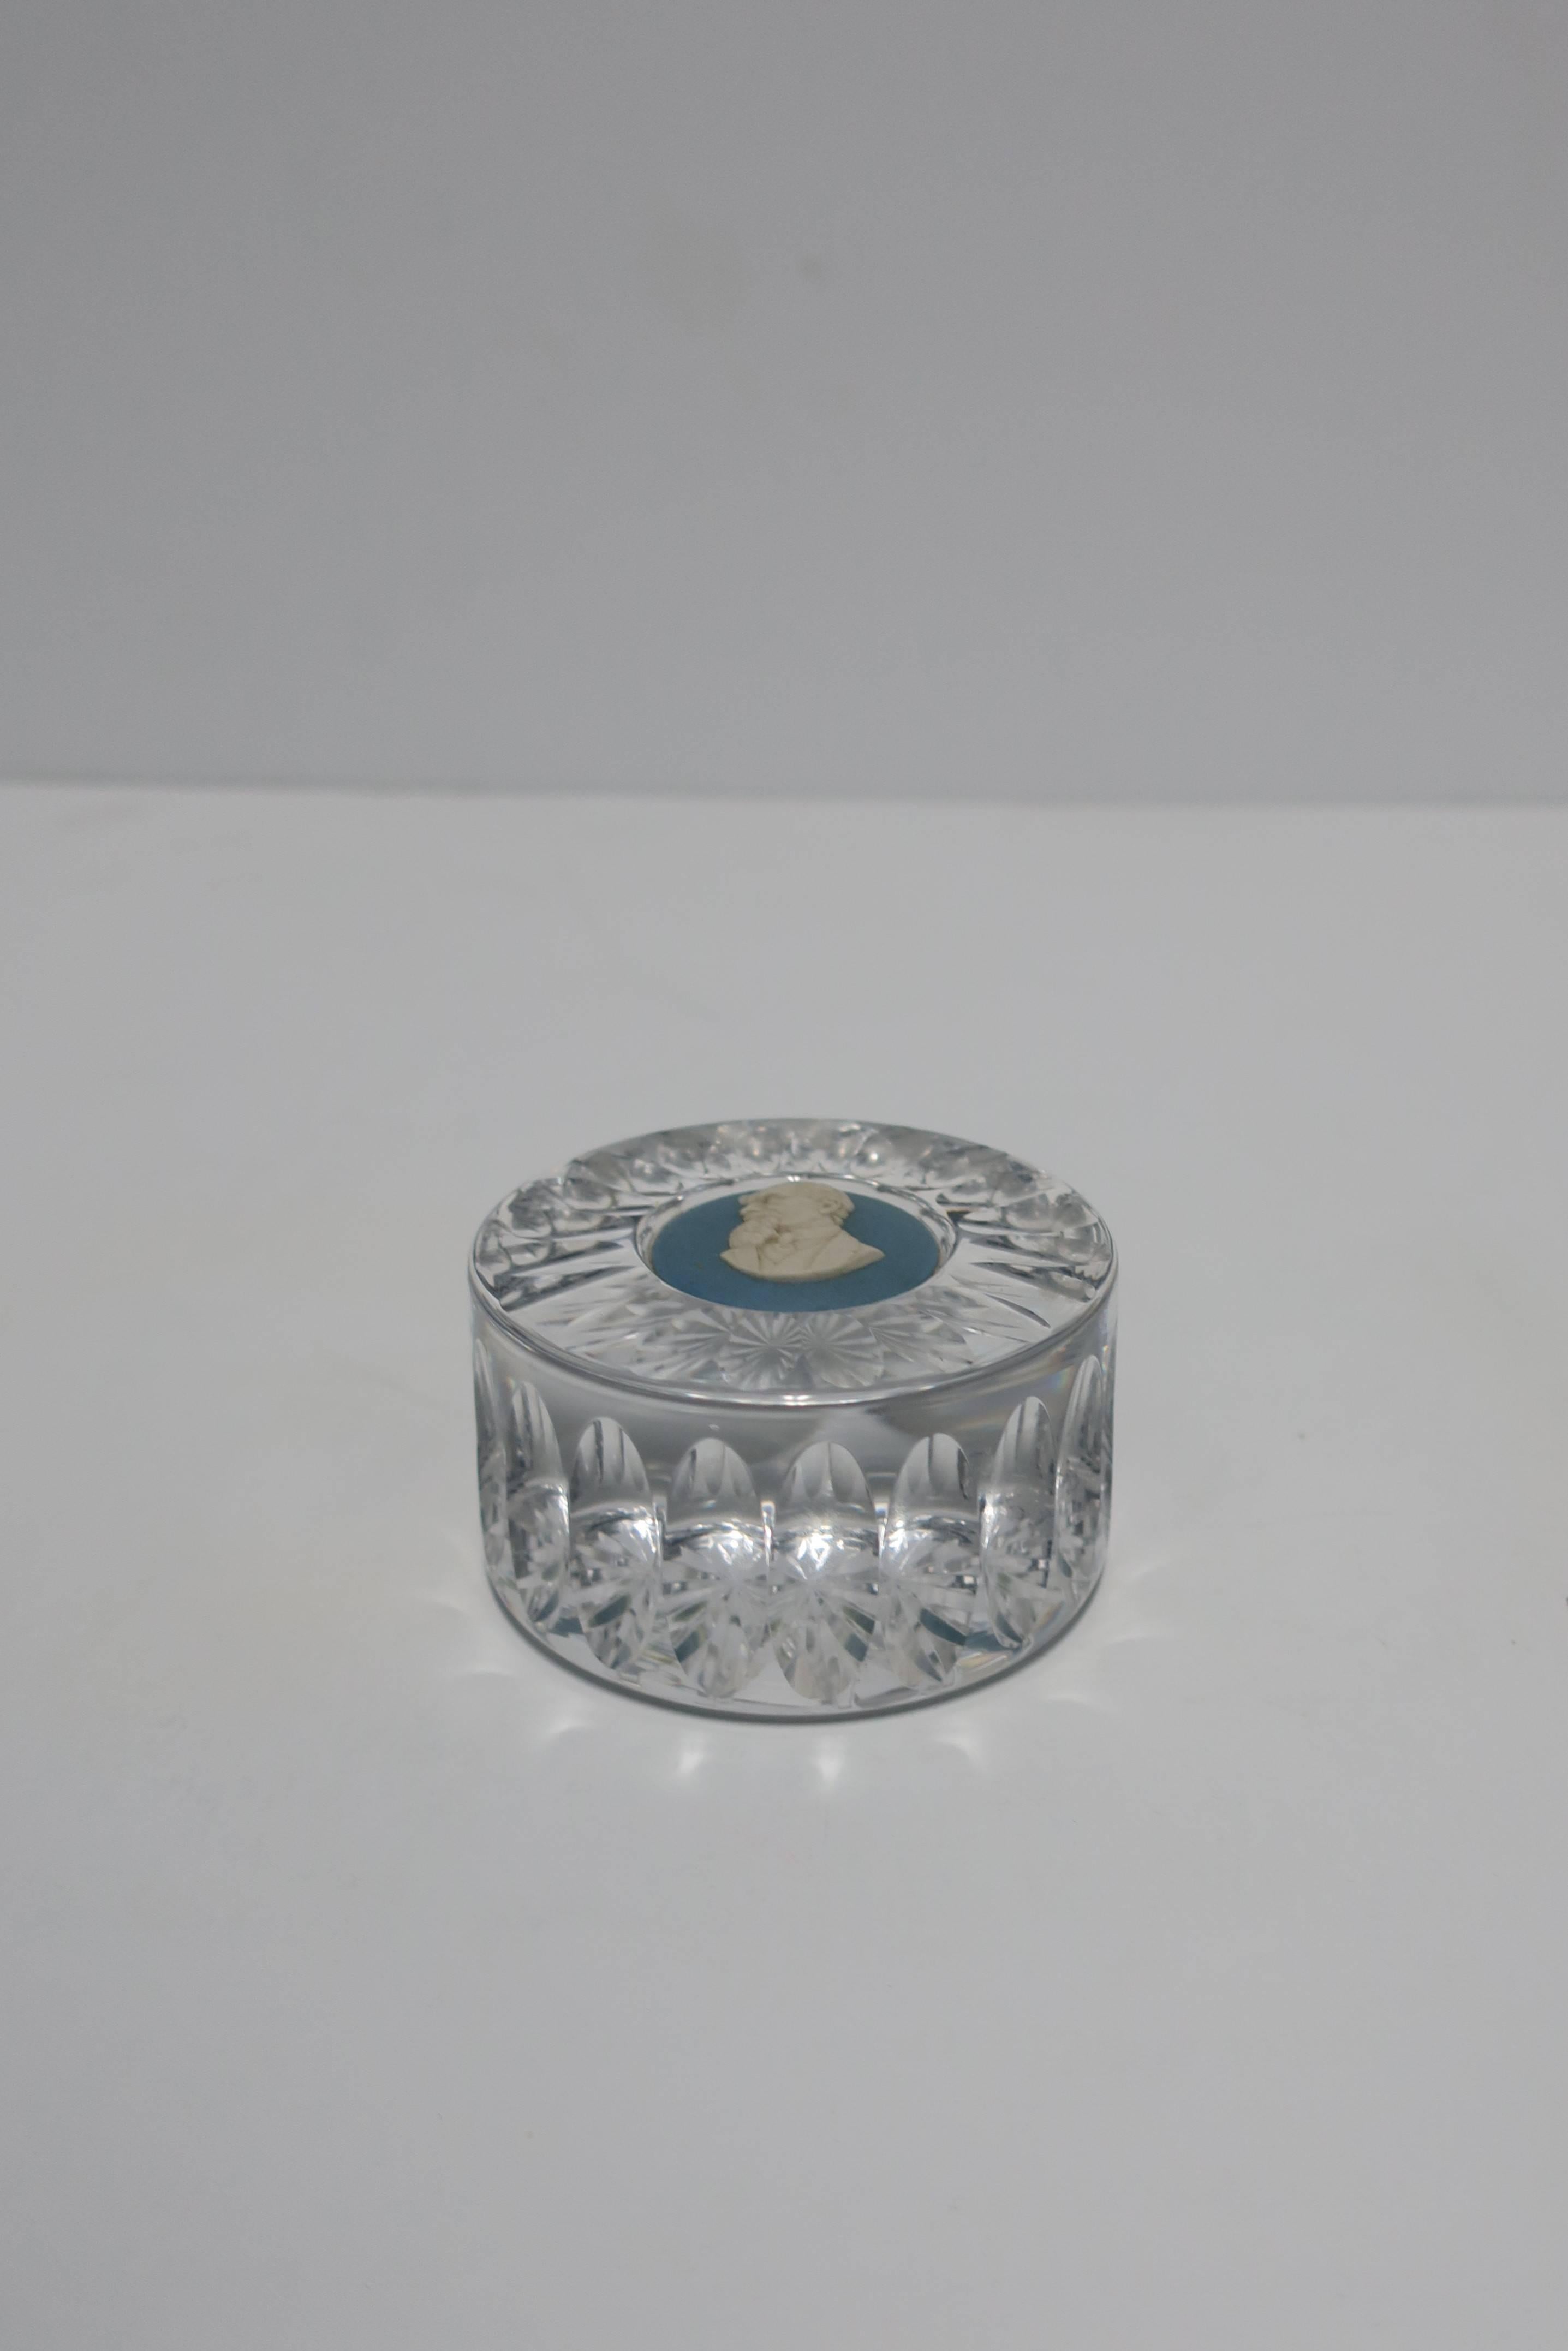 Polished English Jasperware and Crystal Desk Paperweight